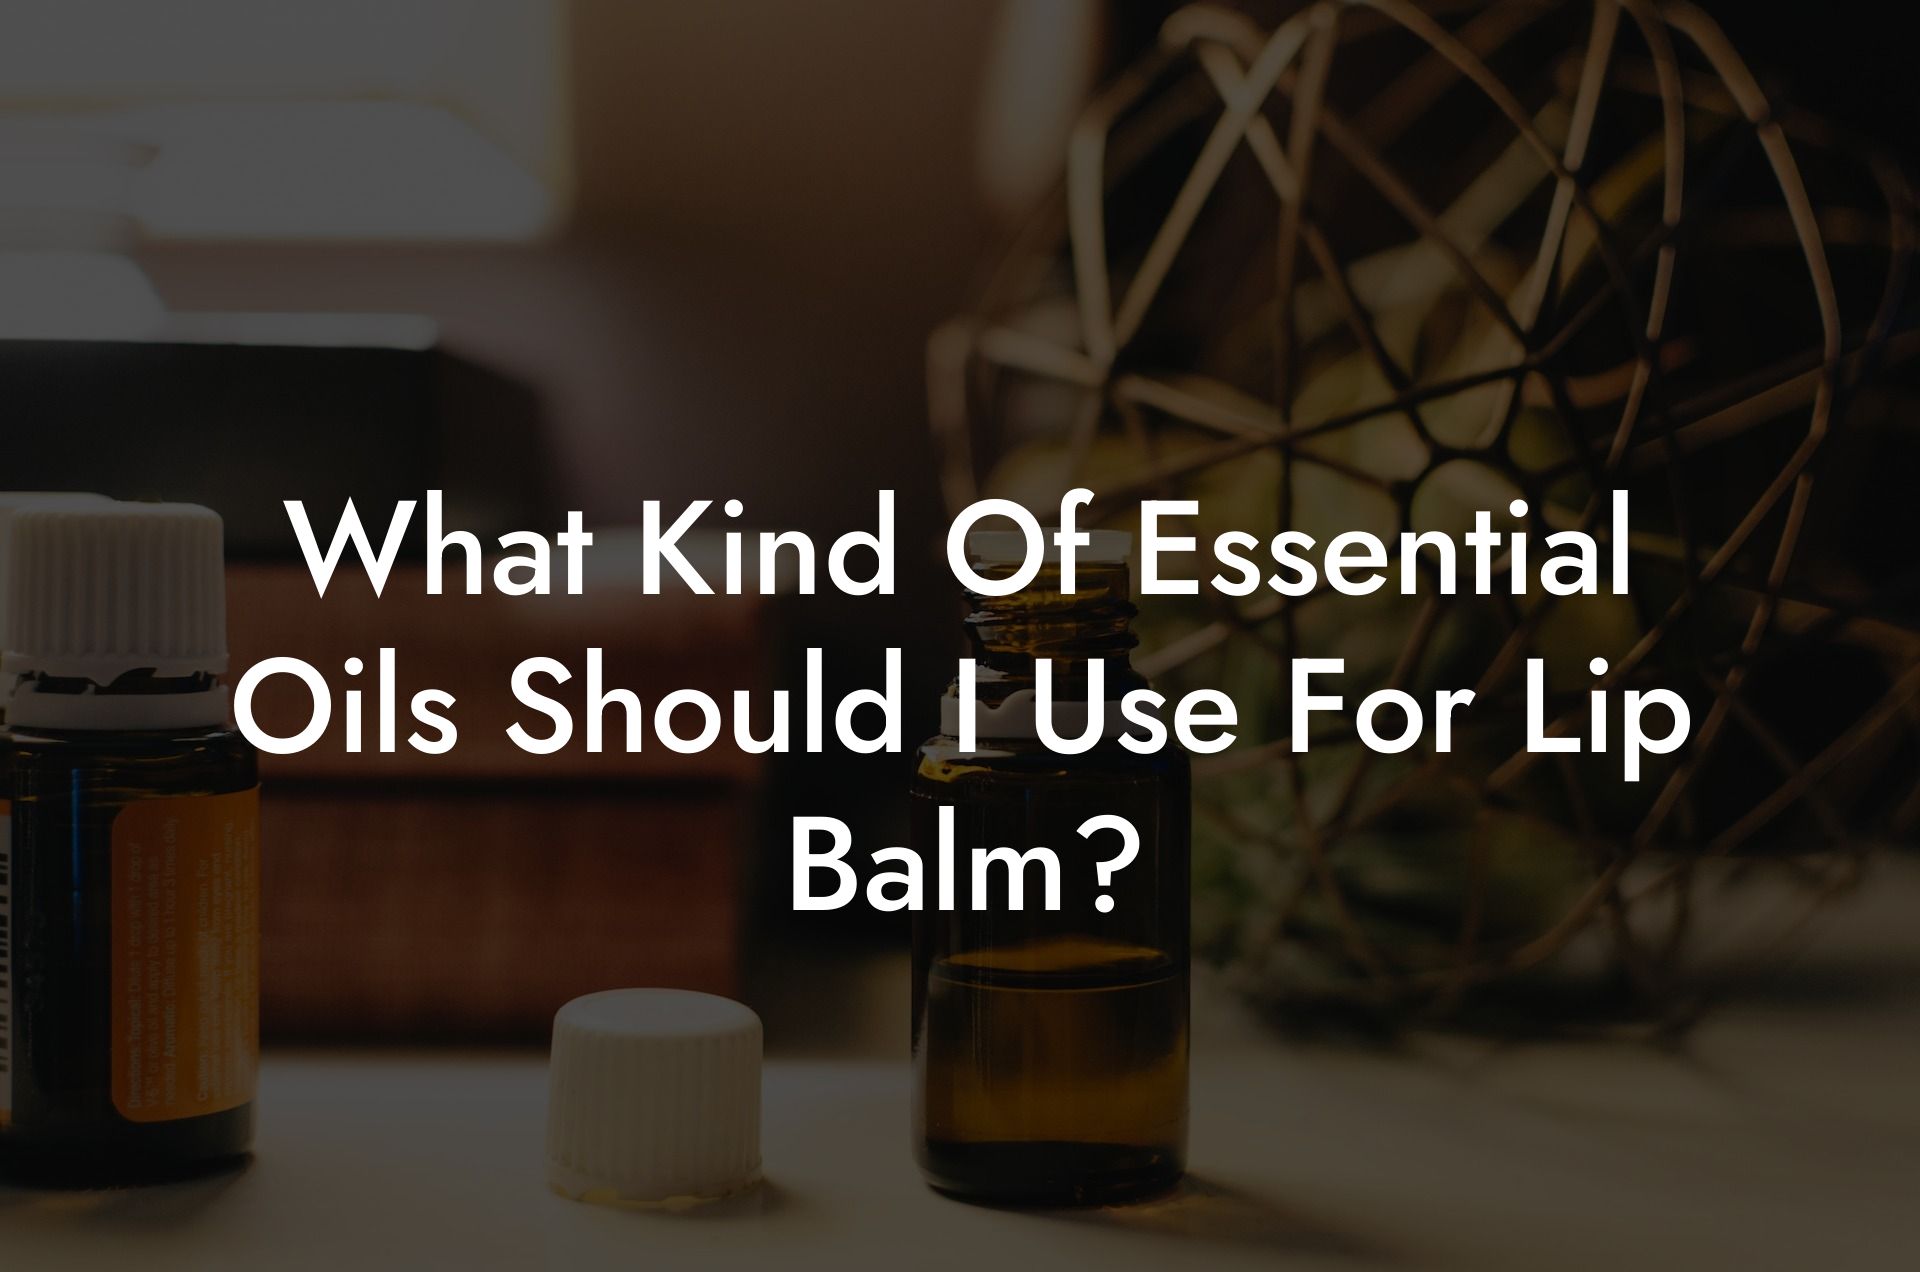 What Kind Of Essential Oils Should I Use For Lip Balm?